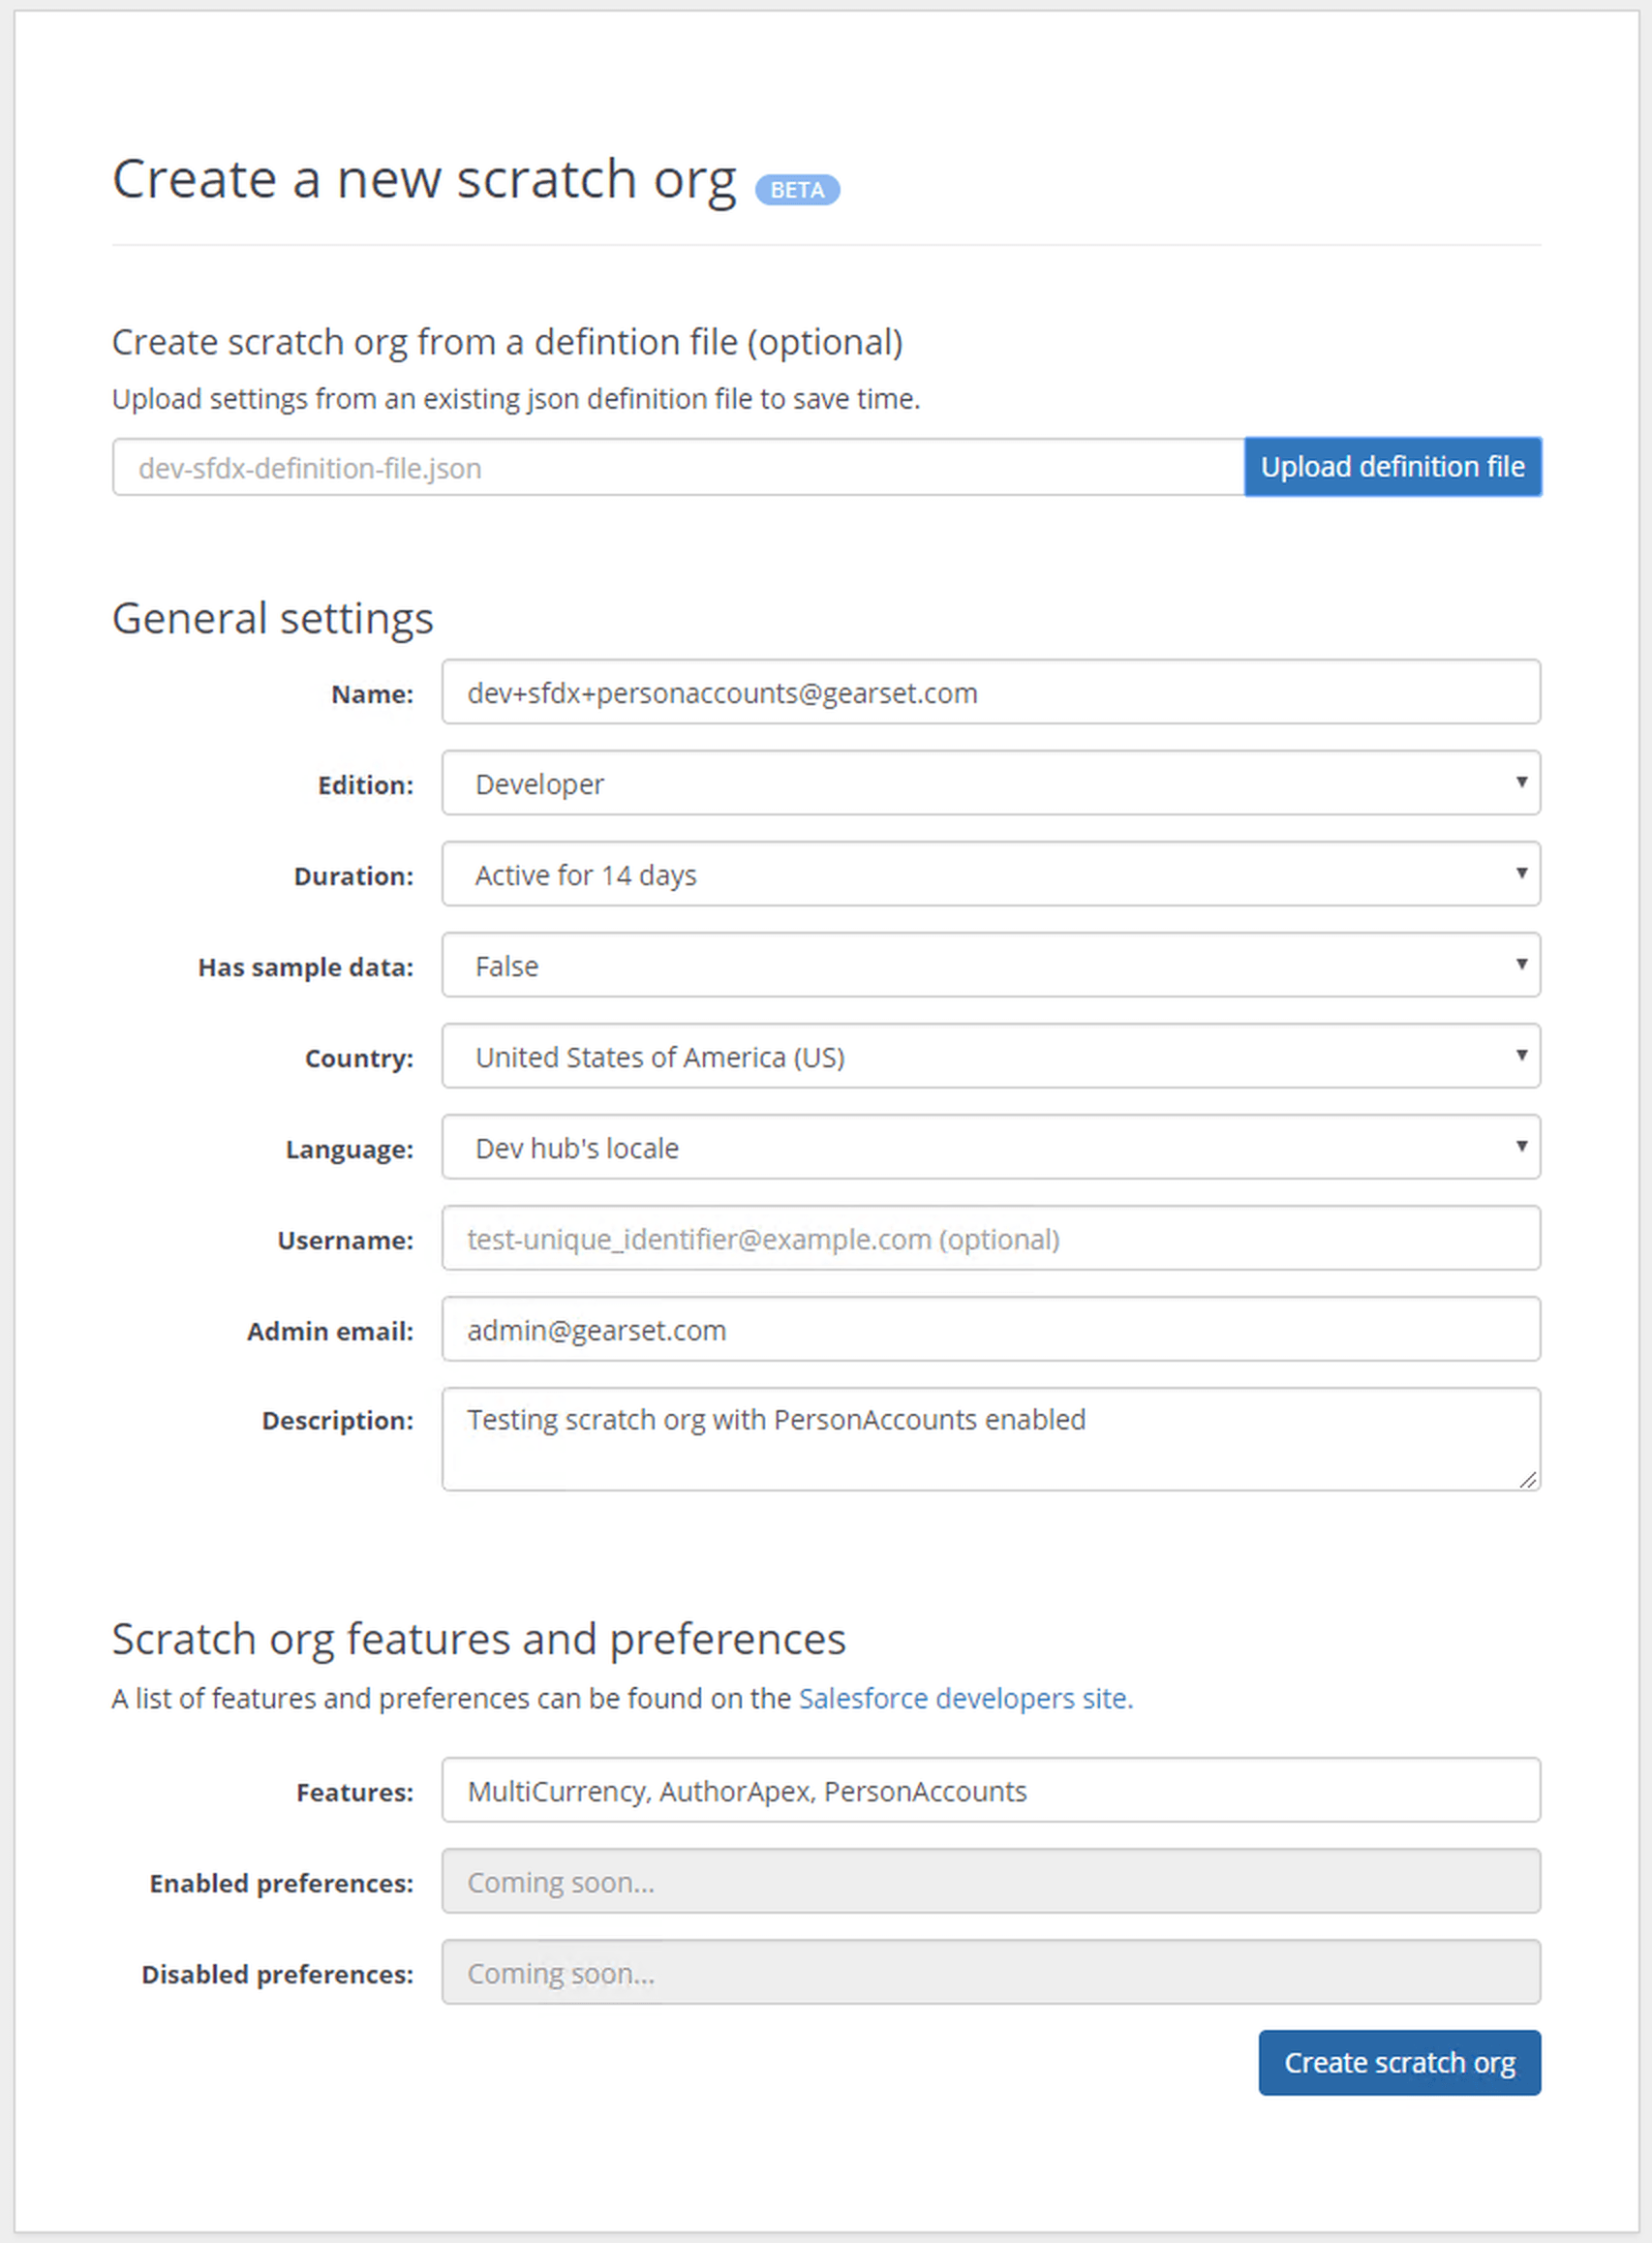 Upload your definition file and Gearset will automatically fill in the settings for your new org.